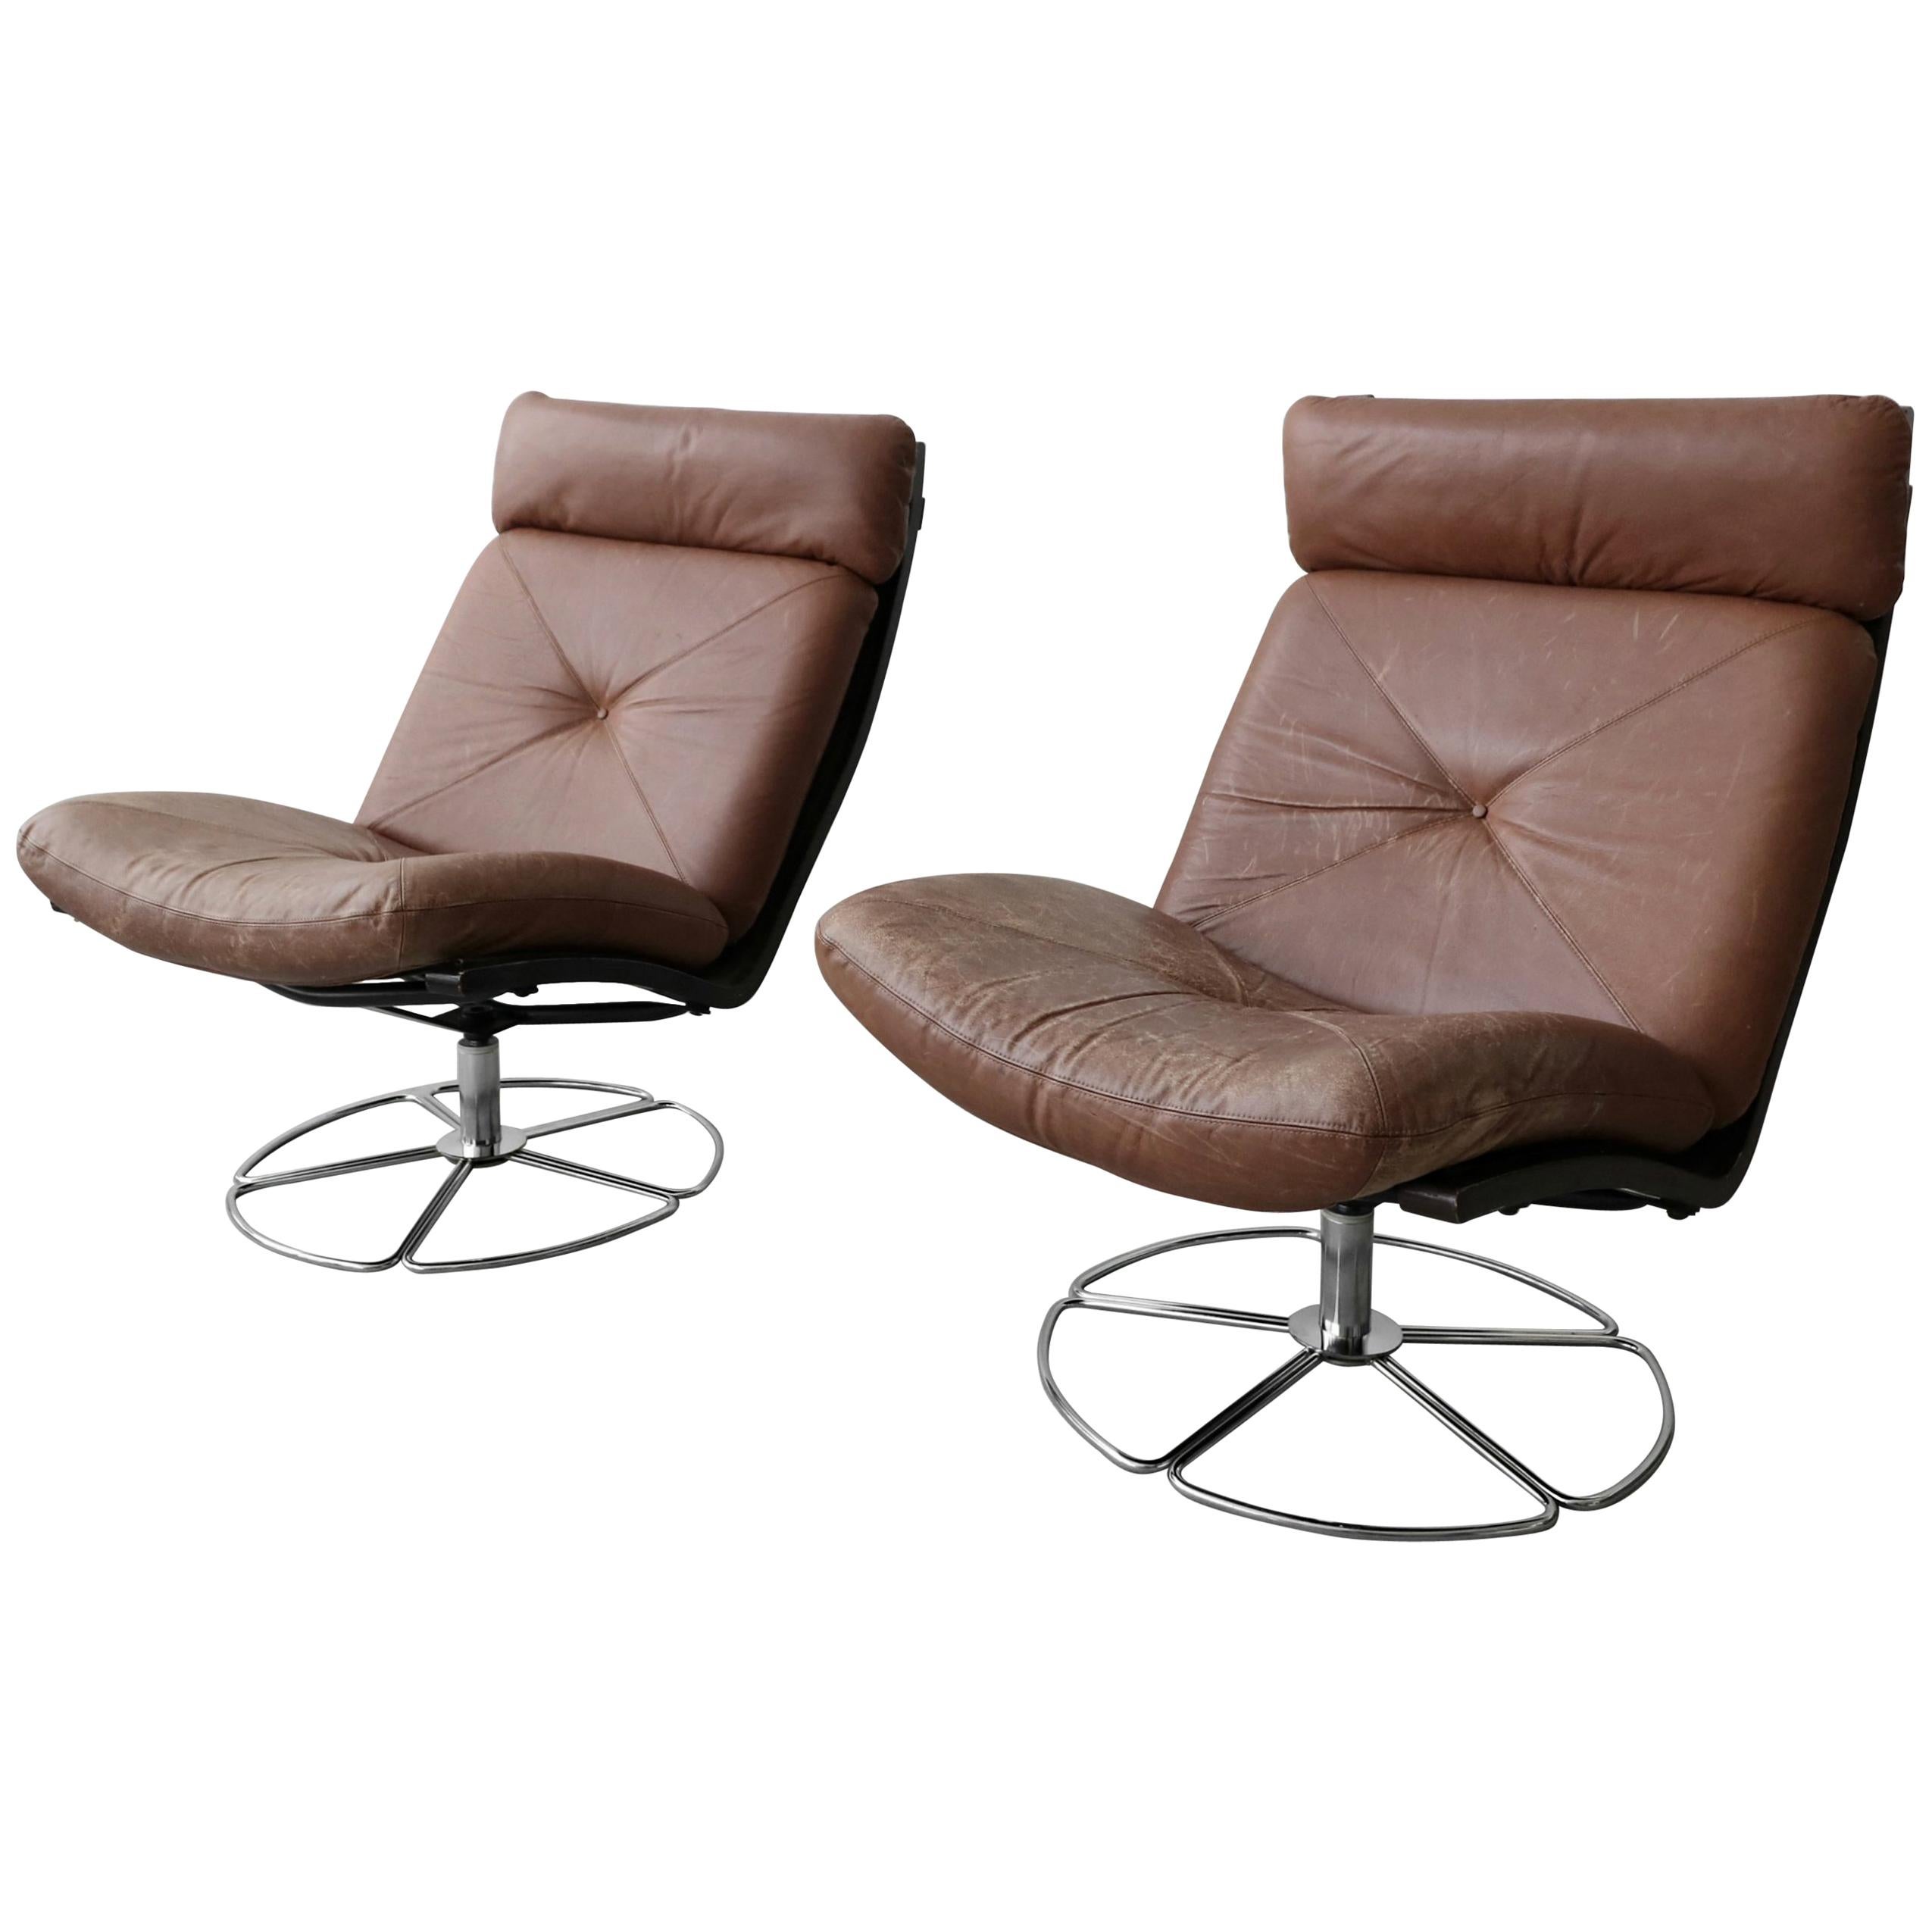 Pair of Midcentury Leather and Chrome Armless Swivel Danish Style Lounge Chairs